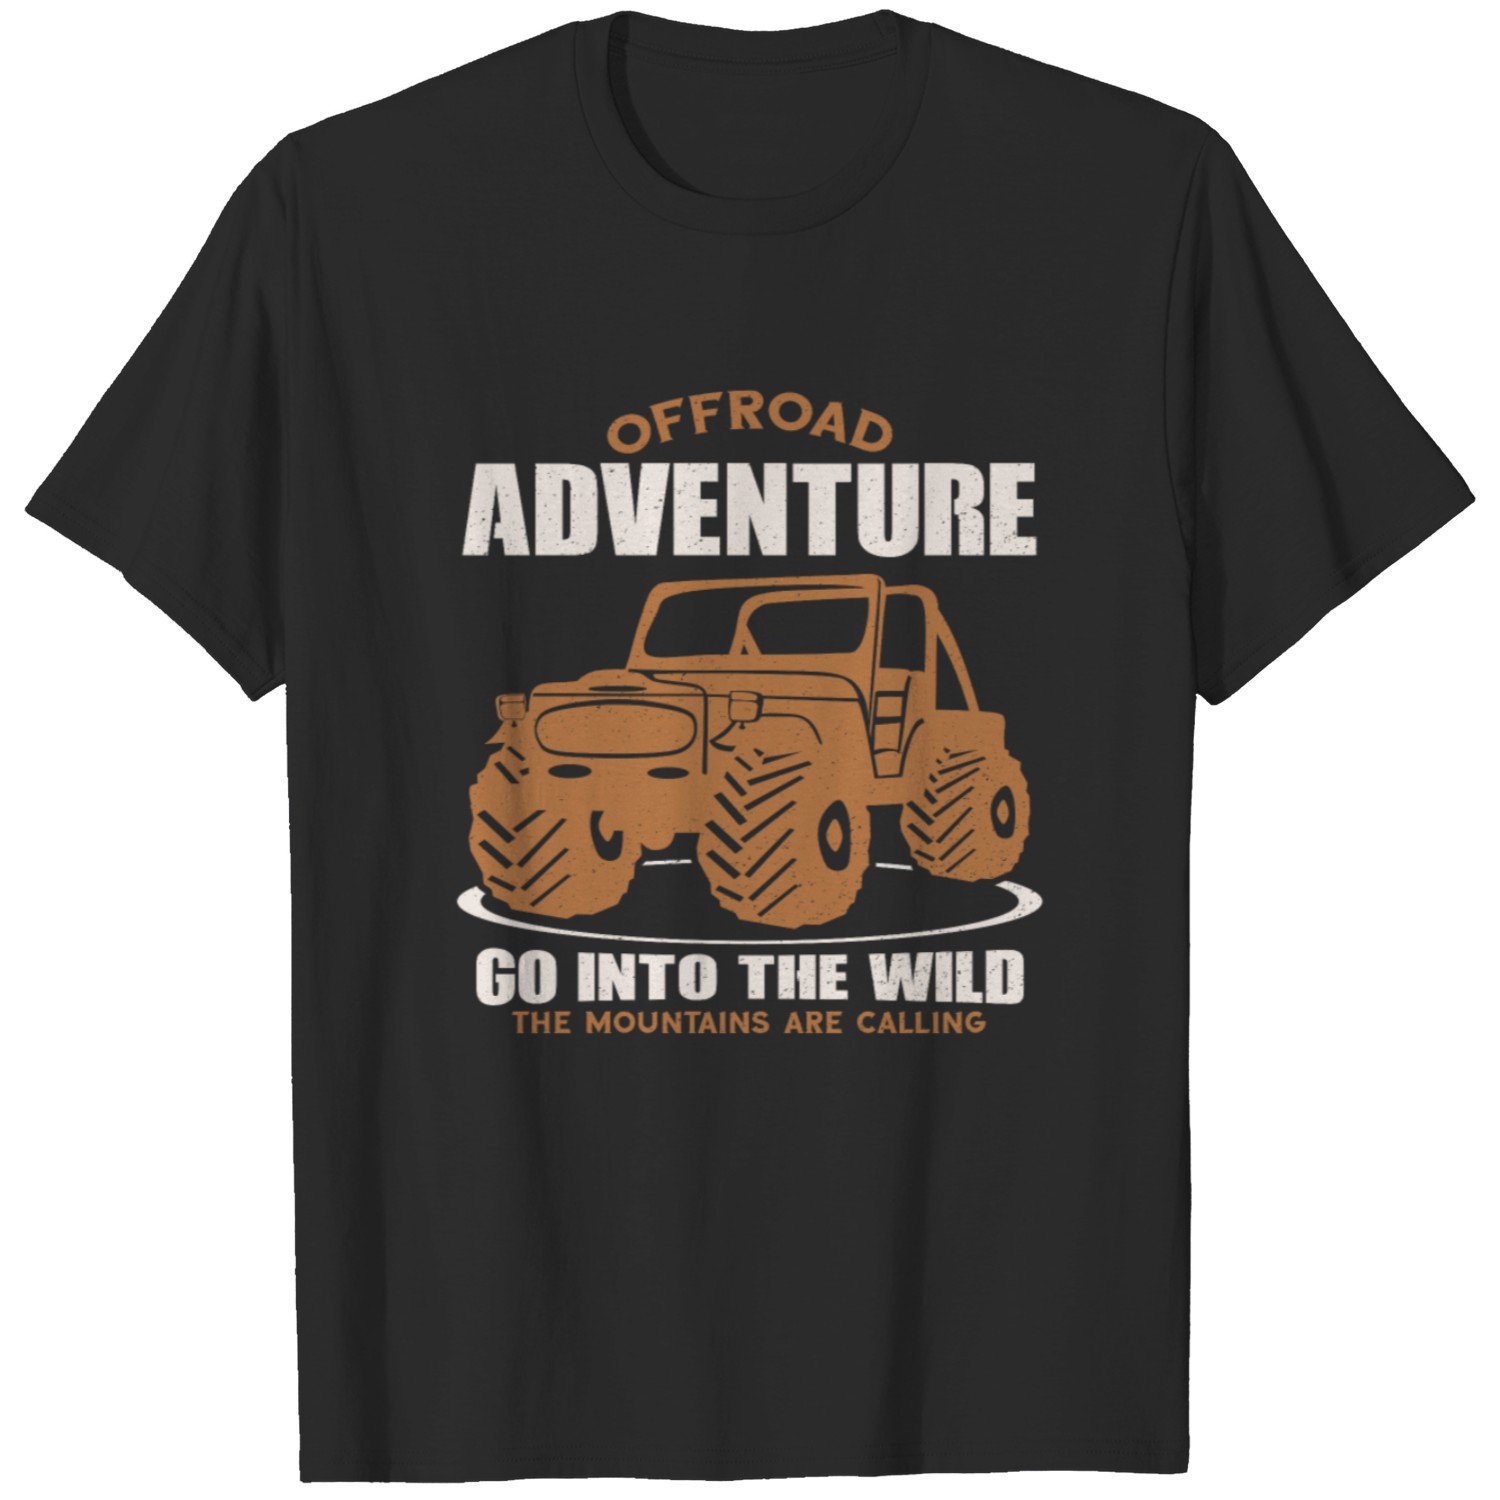 Offroad Adventure, 4x4, off-road vehicle T-shirt